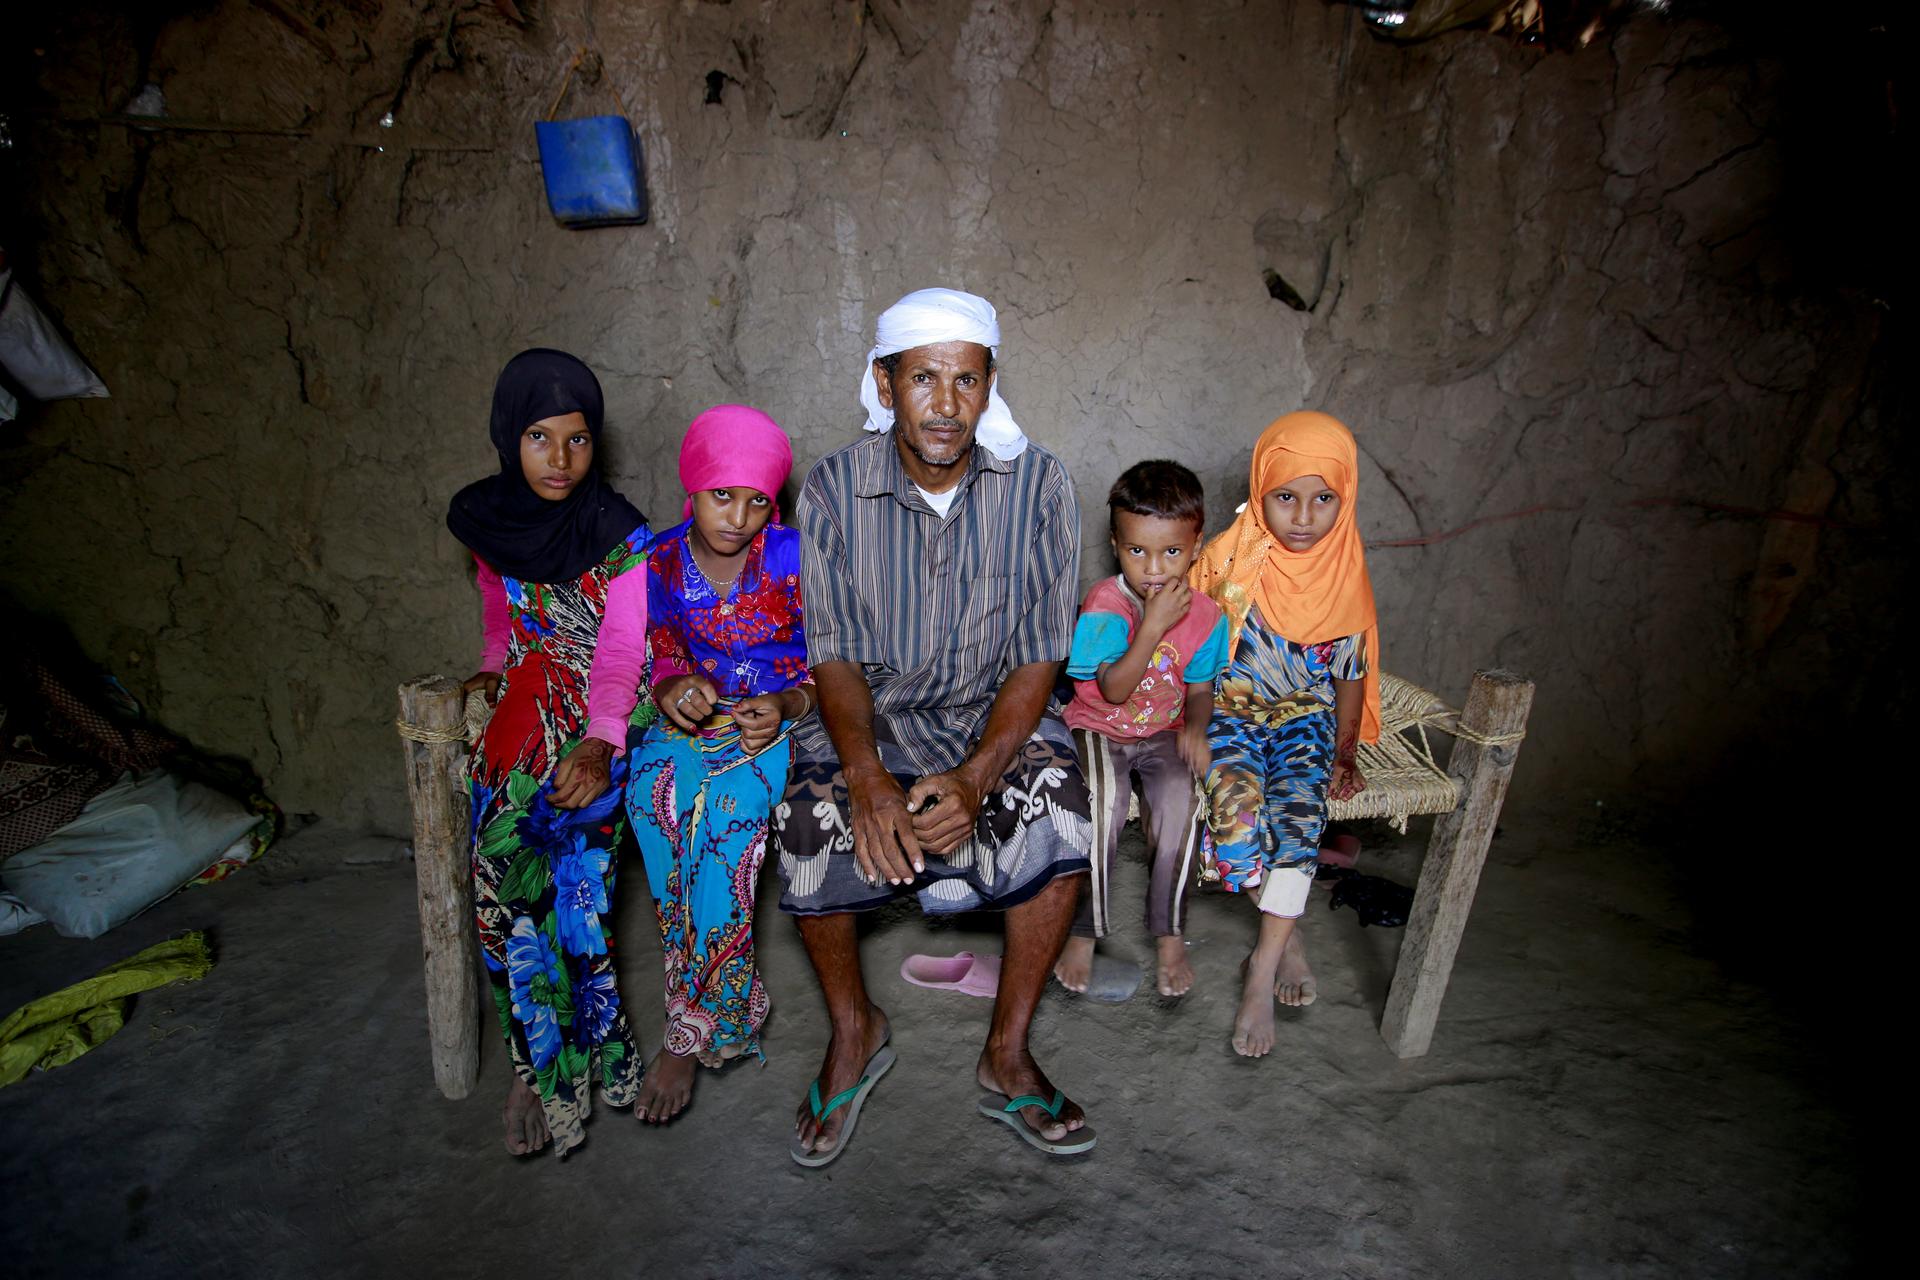 Saida Ahmed Baghili, second from left, 19, who is recovering from severe malnutrition, poses for a photograph with her father and her sisters Jalila, left, 12, and Amal, right, 7, and 4-year-old brother Omar at their hut in al-Tuhaita district of Hodeidah